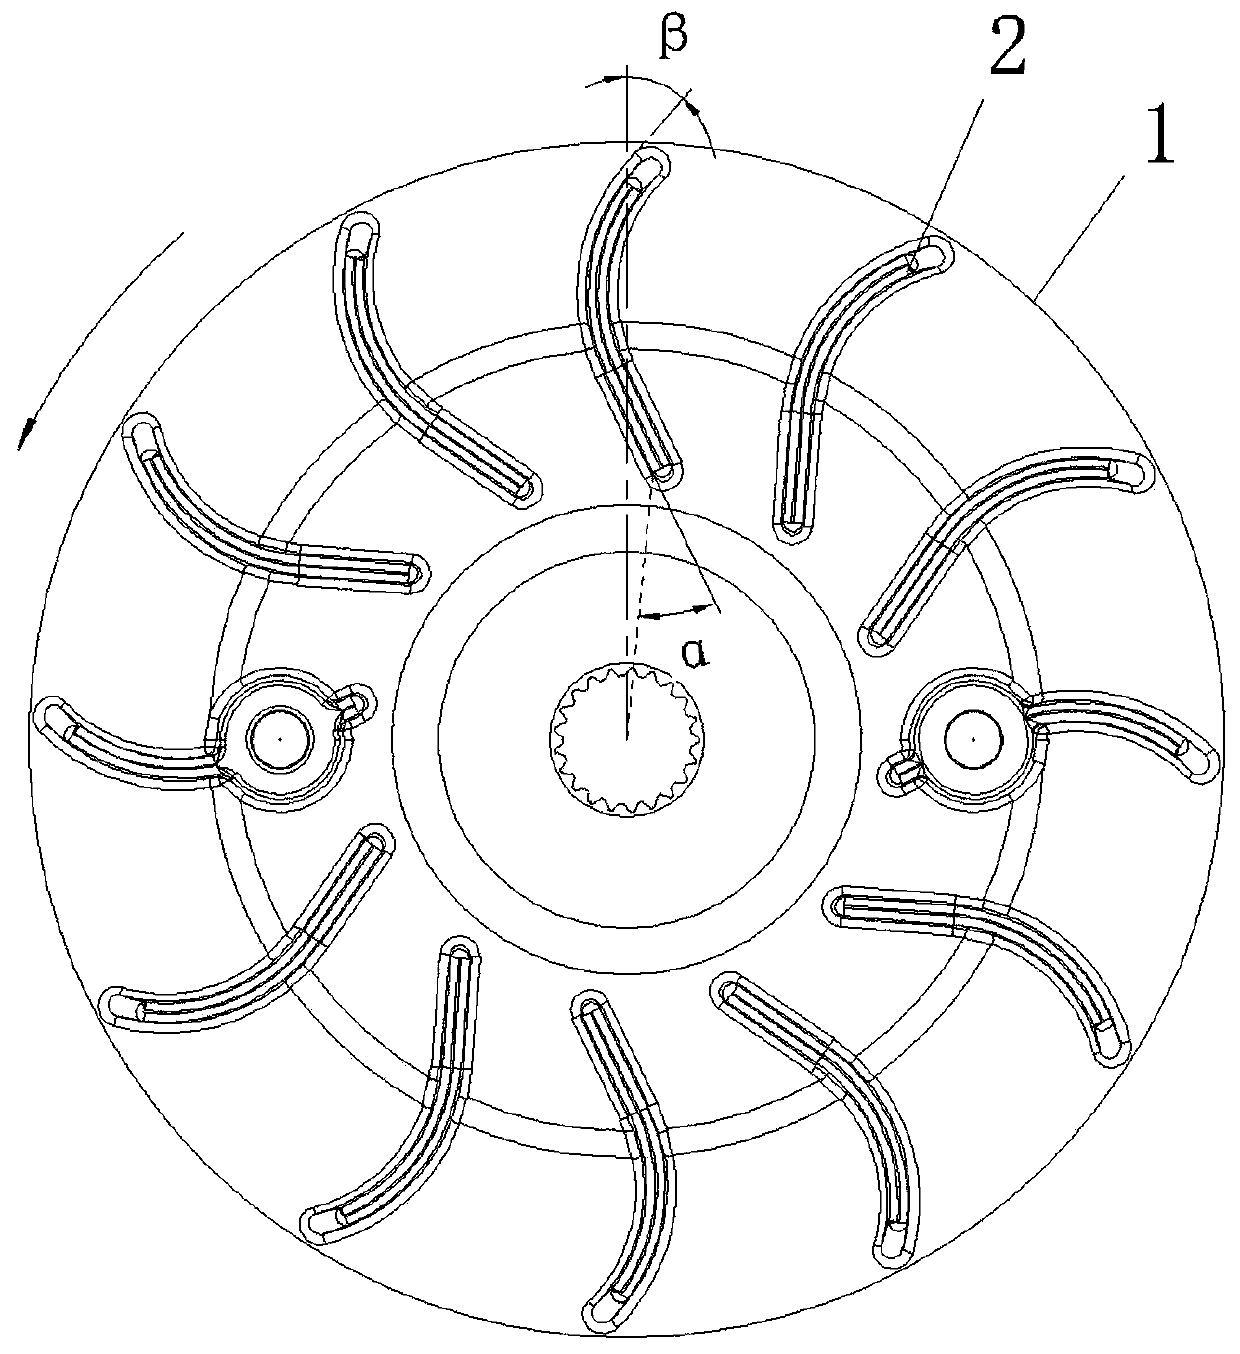 Cooling fan, air cooling system and engine